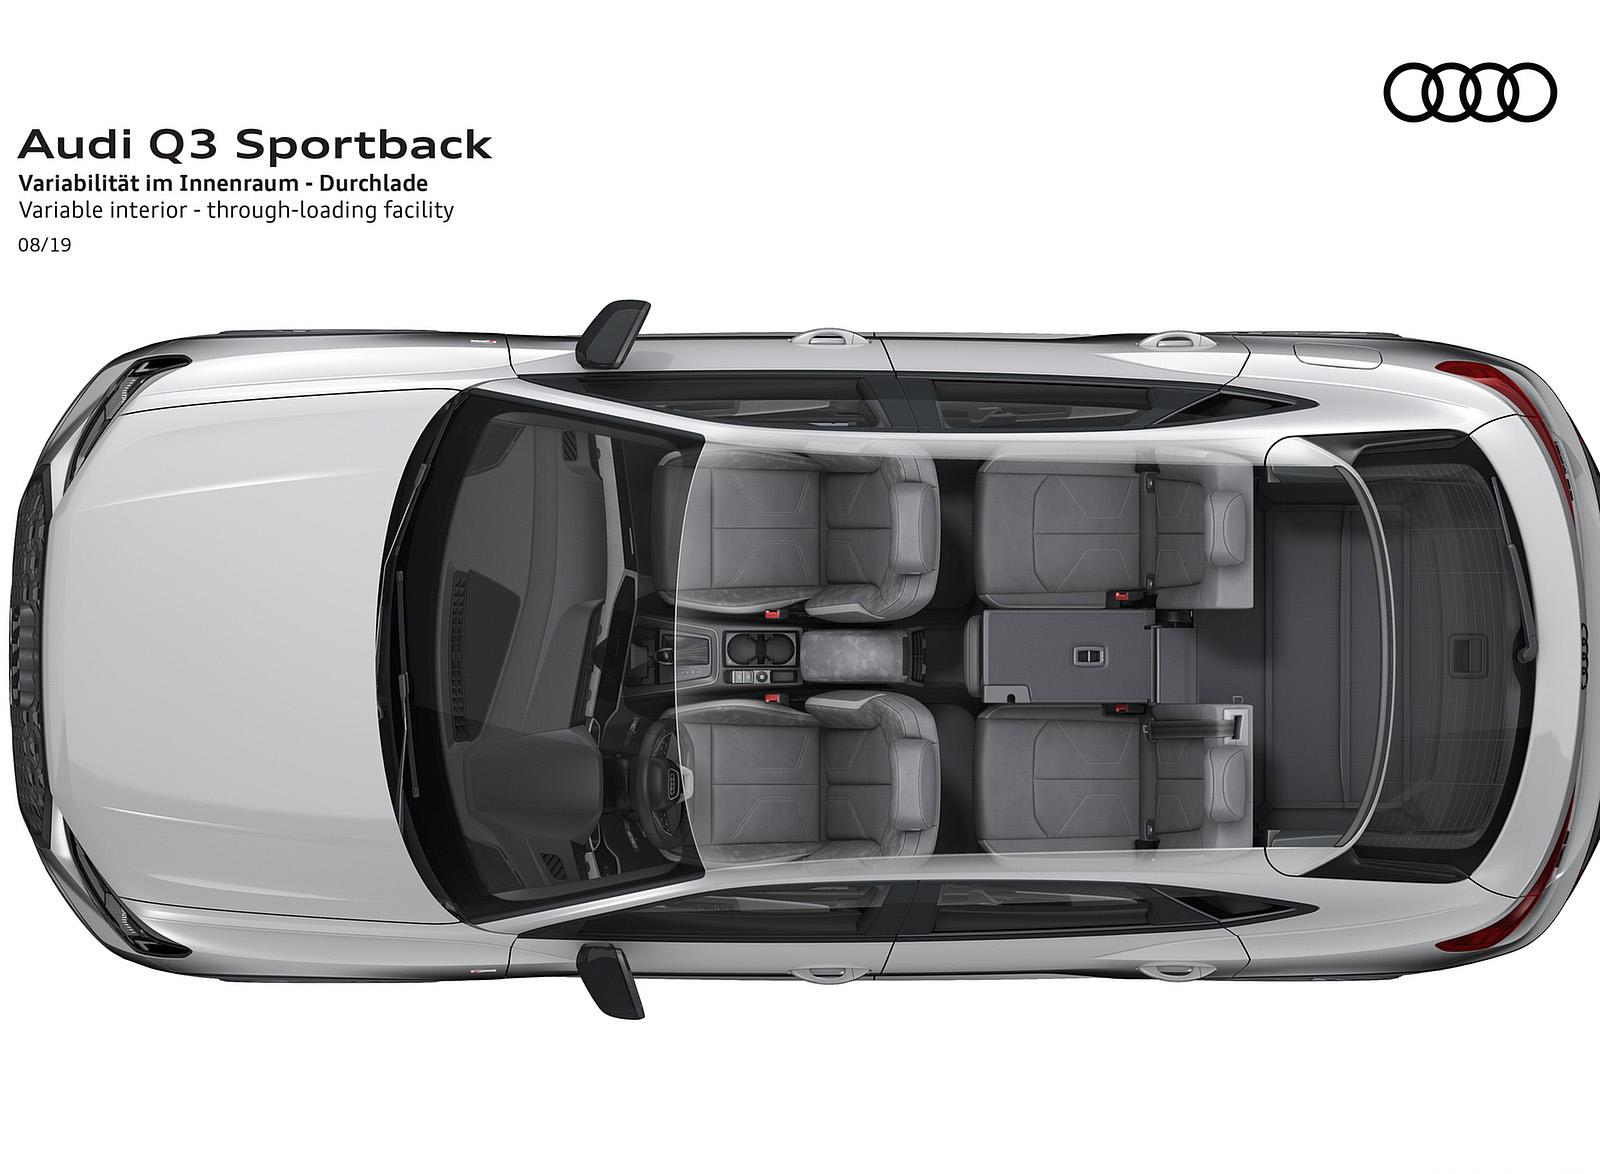 2020 Audi Q3 Sportback Variable interior through-loading facility Wallpapers #260 of 285